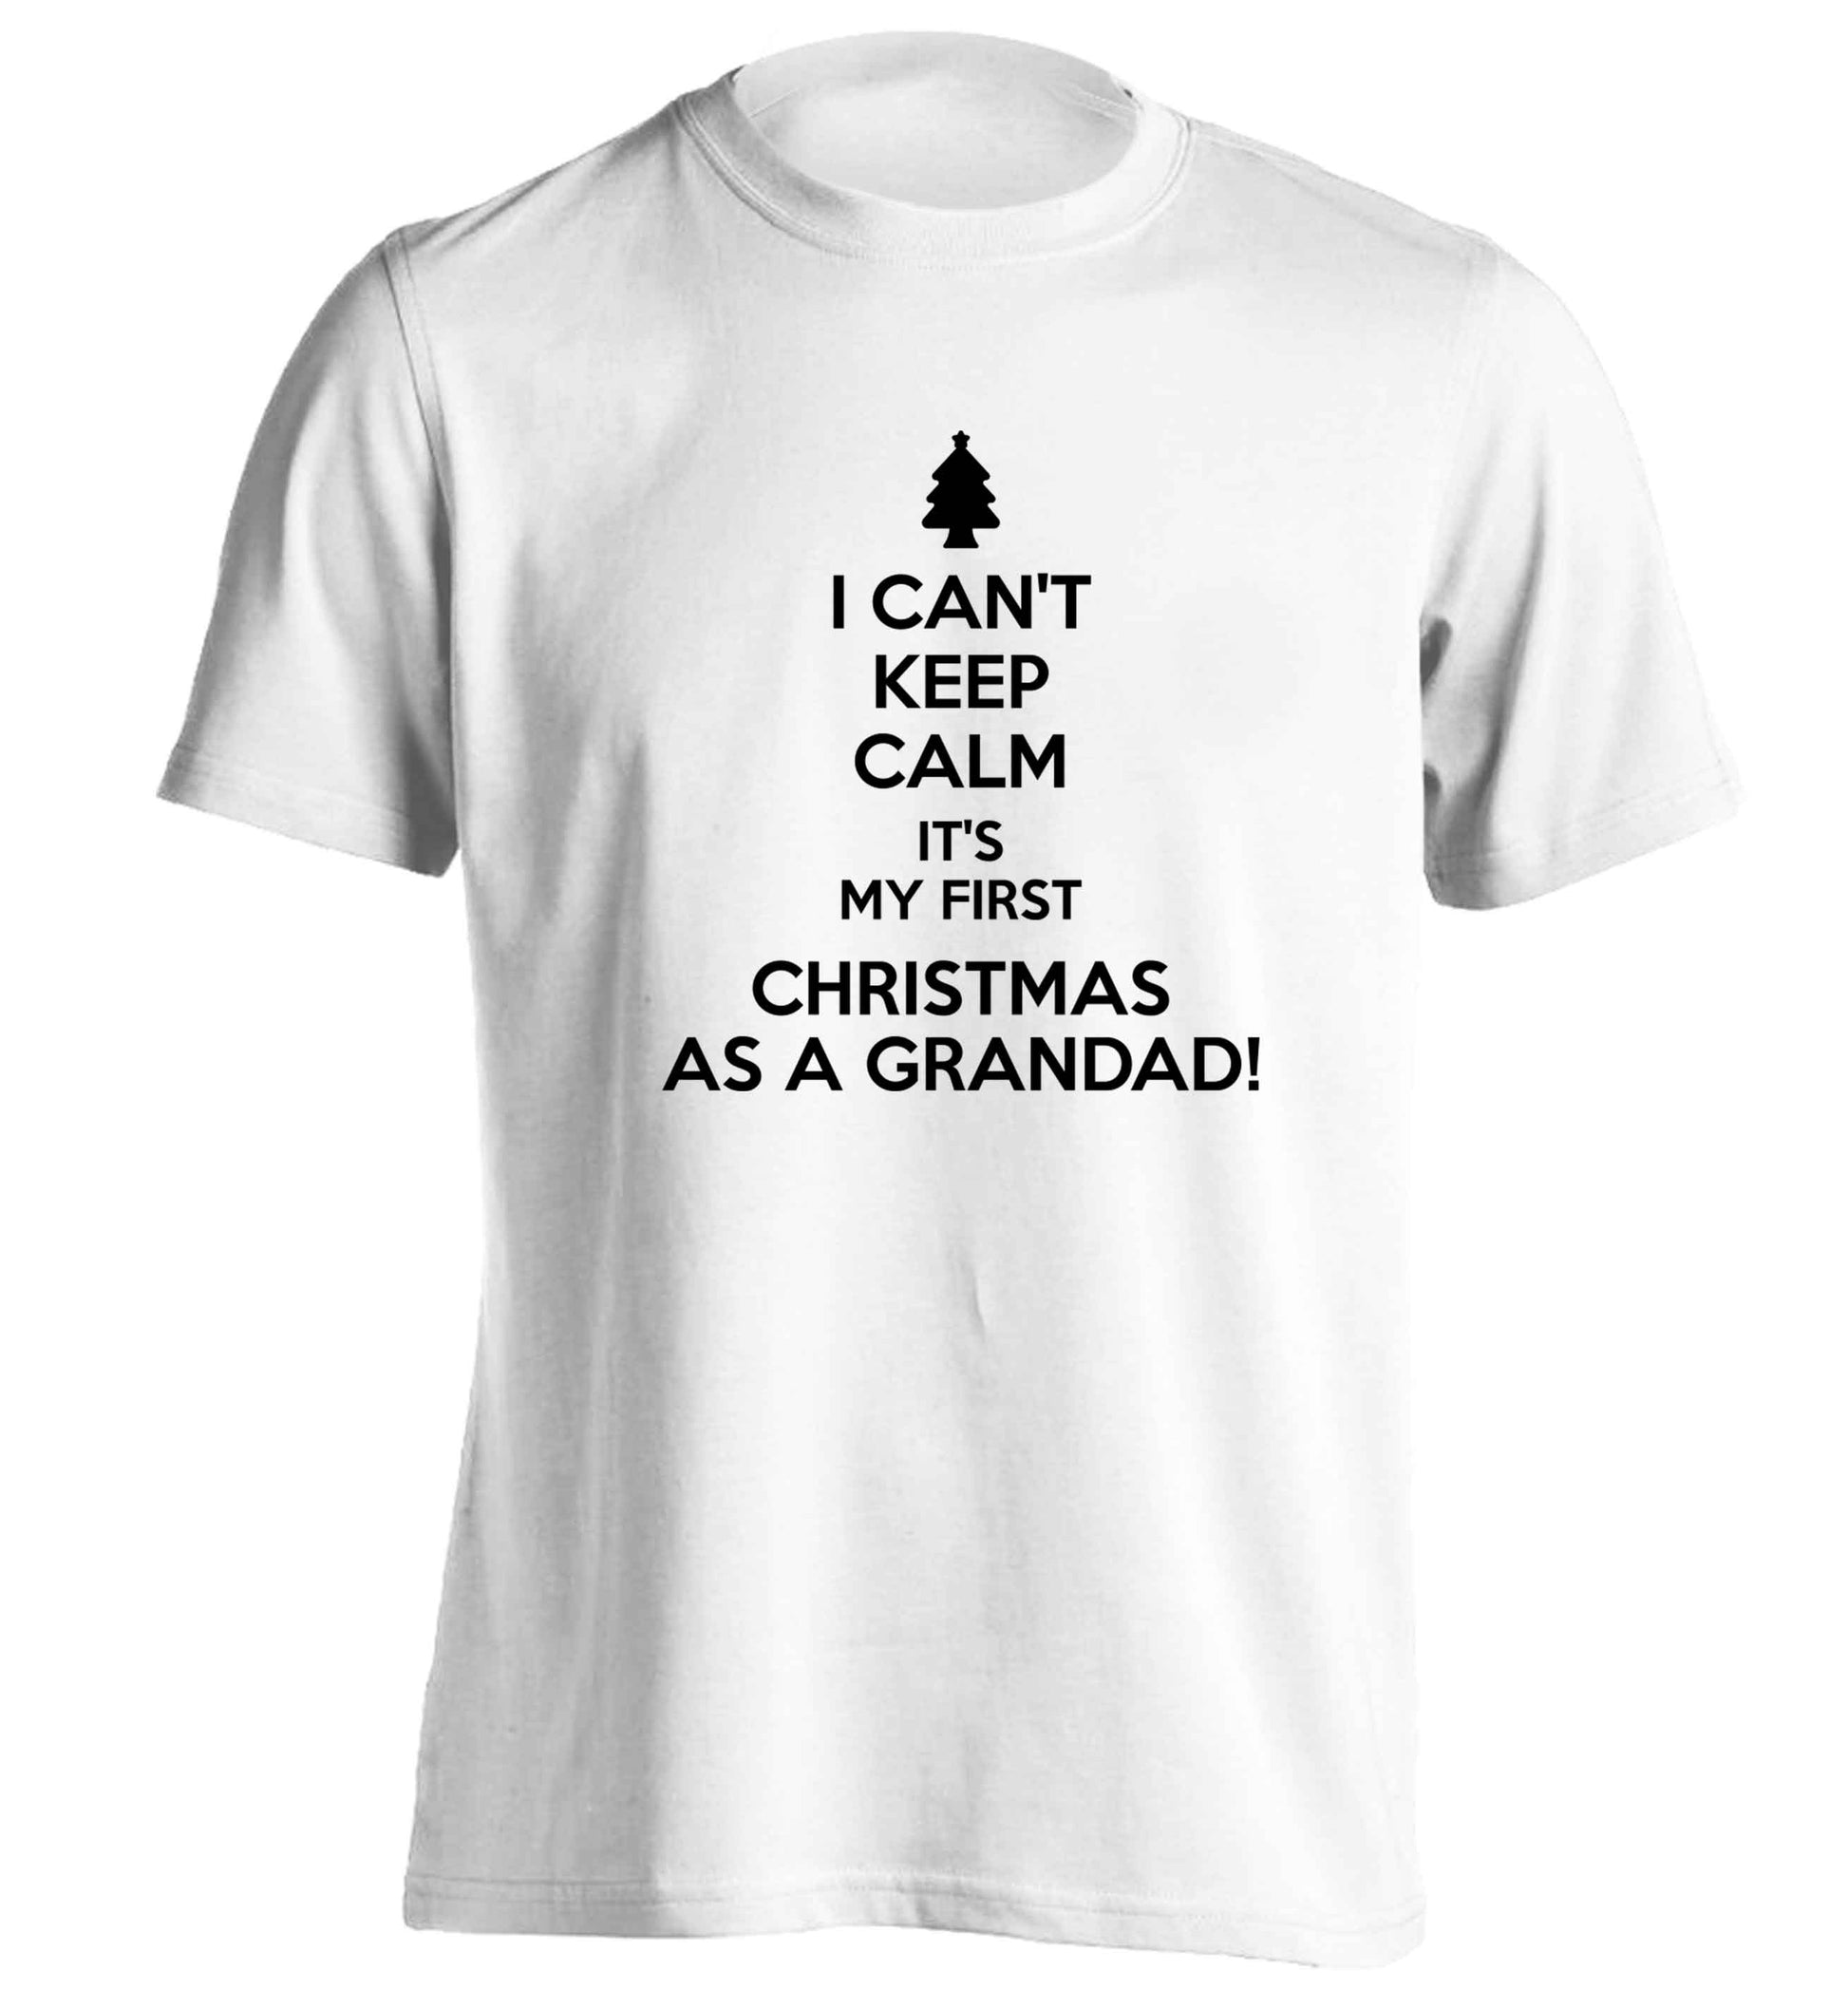 I can't keep calm it's my first Christmas as a grandad! adults unisex white Tshirt 2XL